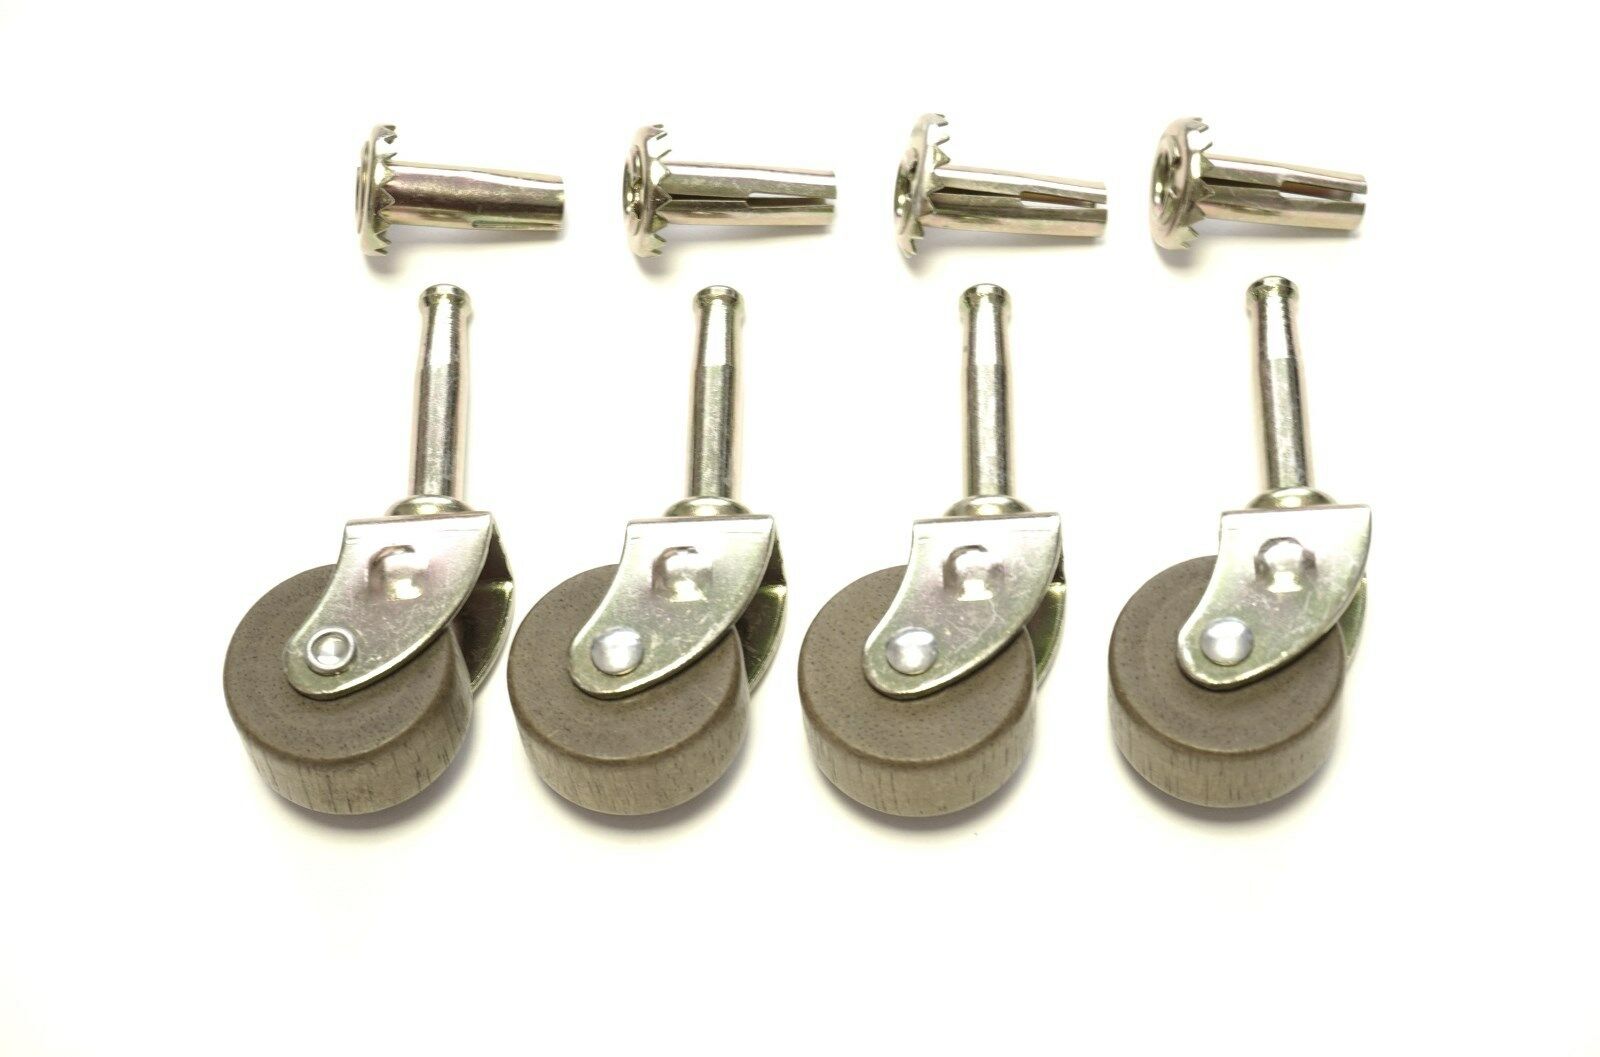 4 Furniture Casters Wood Furniture Casters Grip Neck Caster 1-1/4” Antique Style